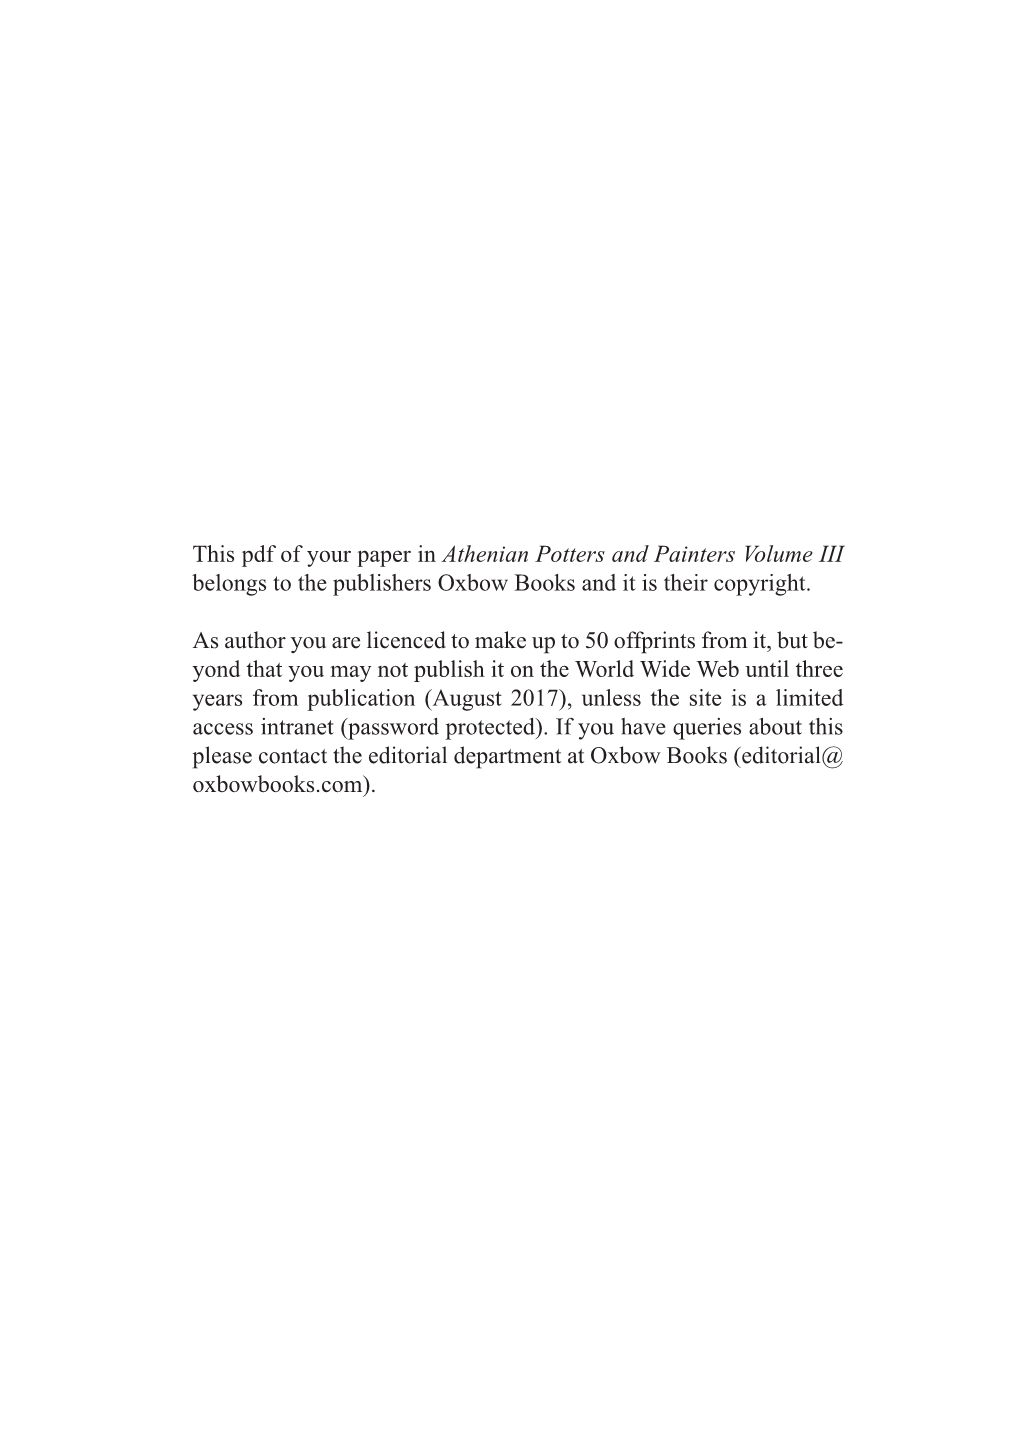 This Pdf of Your Paper in Athenian Potters and Painters Volume III Belongs to the Publishers Oxbow Books and It Is Their Copyright